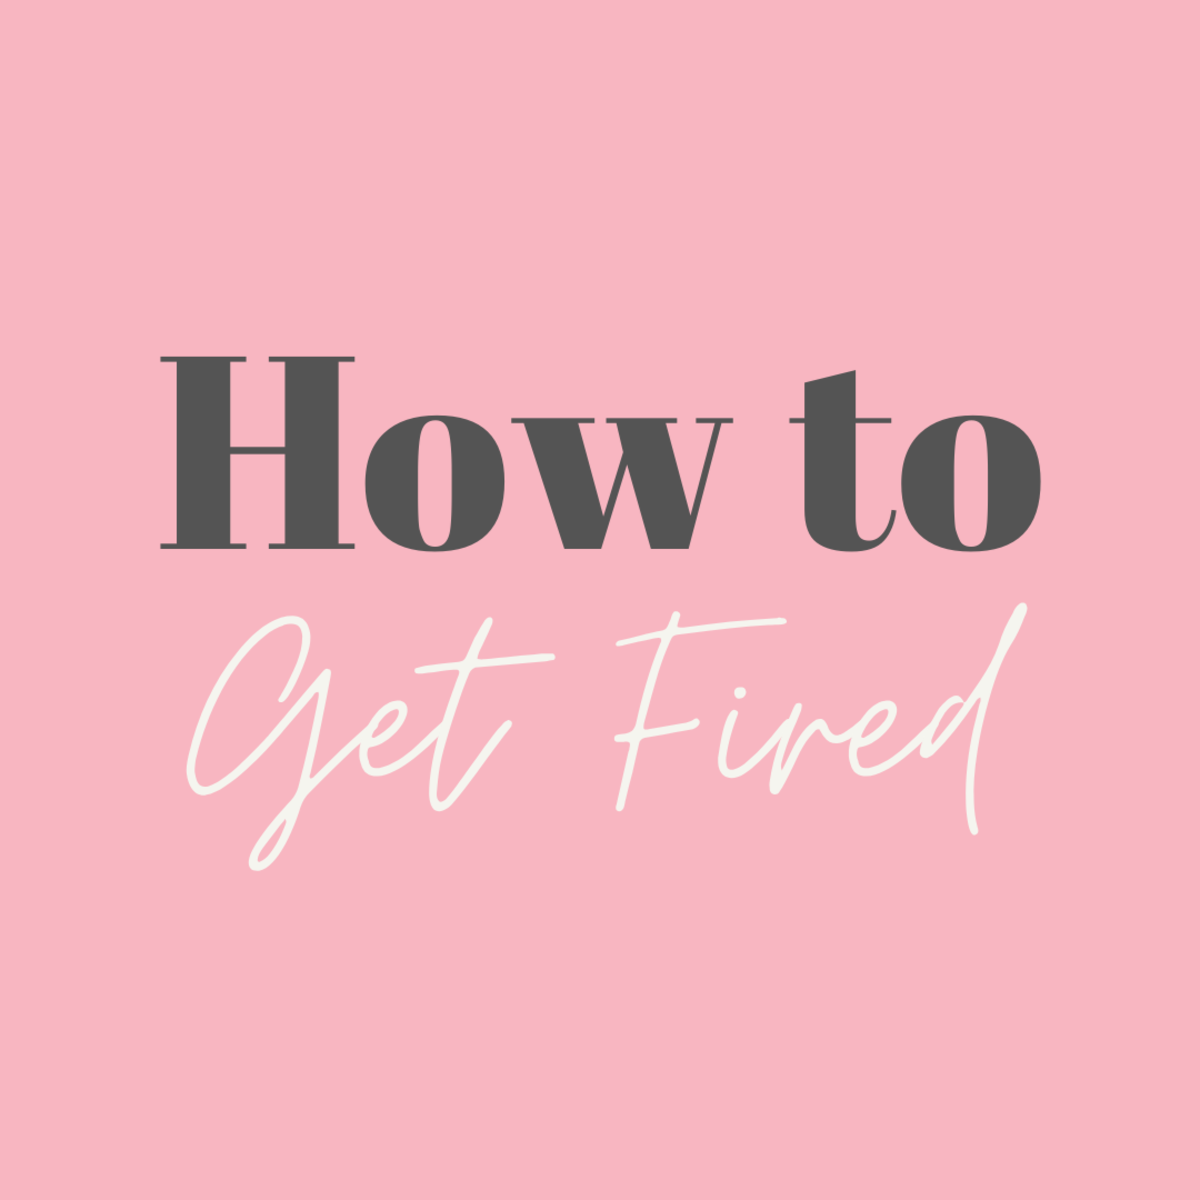 How to get fired: Five ways to guarantee your unemployment!